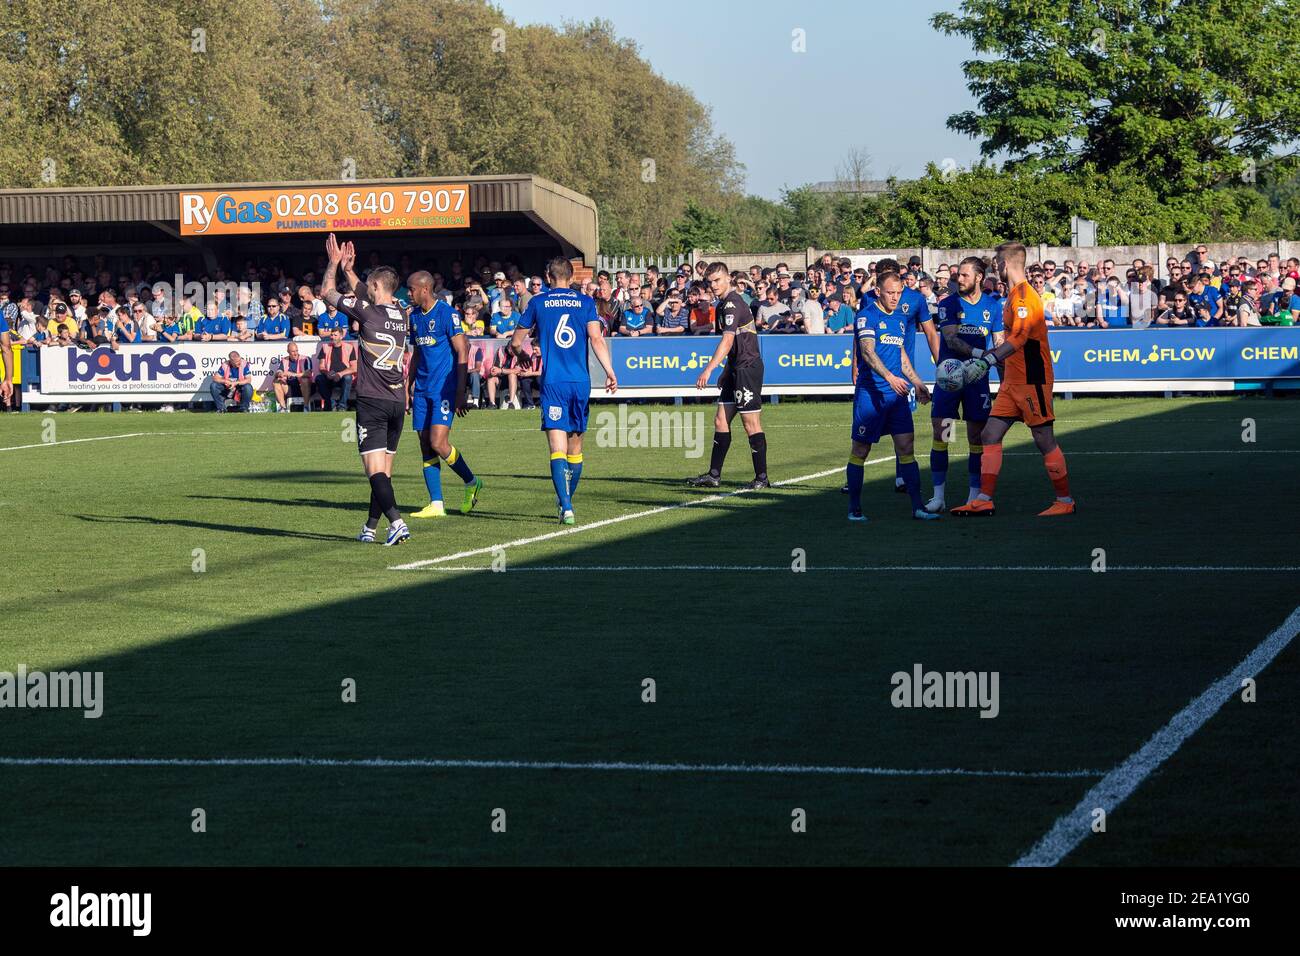 Britain Football Soccer - Bury v AFC Wimbledon in Kingsmeadow Stadion in Nobiton , England , May 2018 . Stock Photo